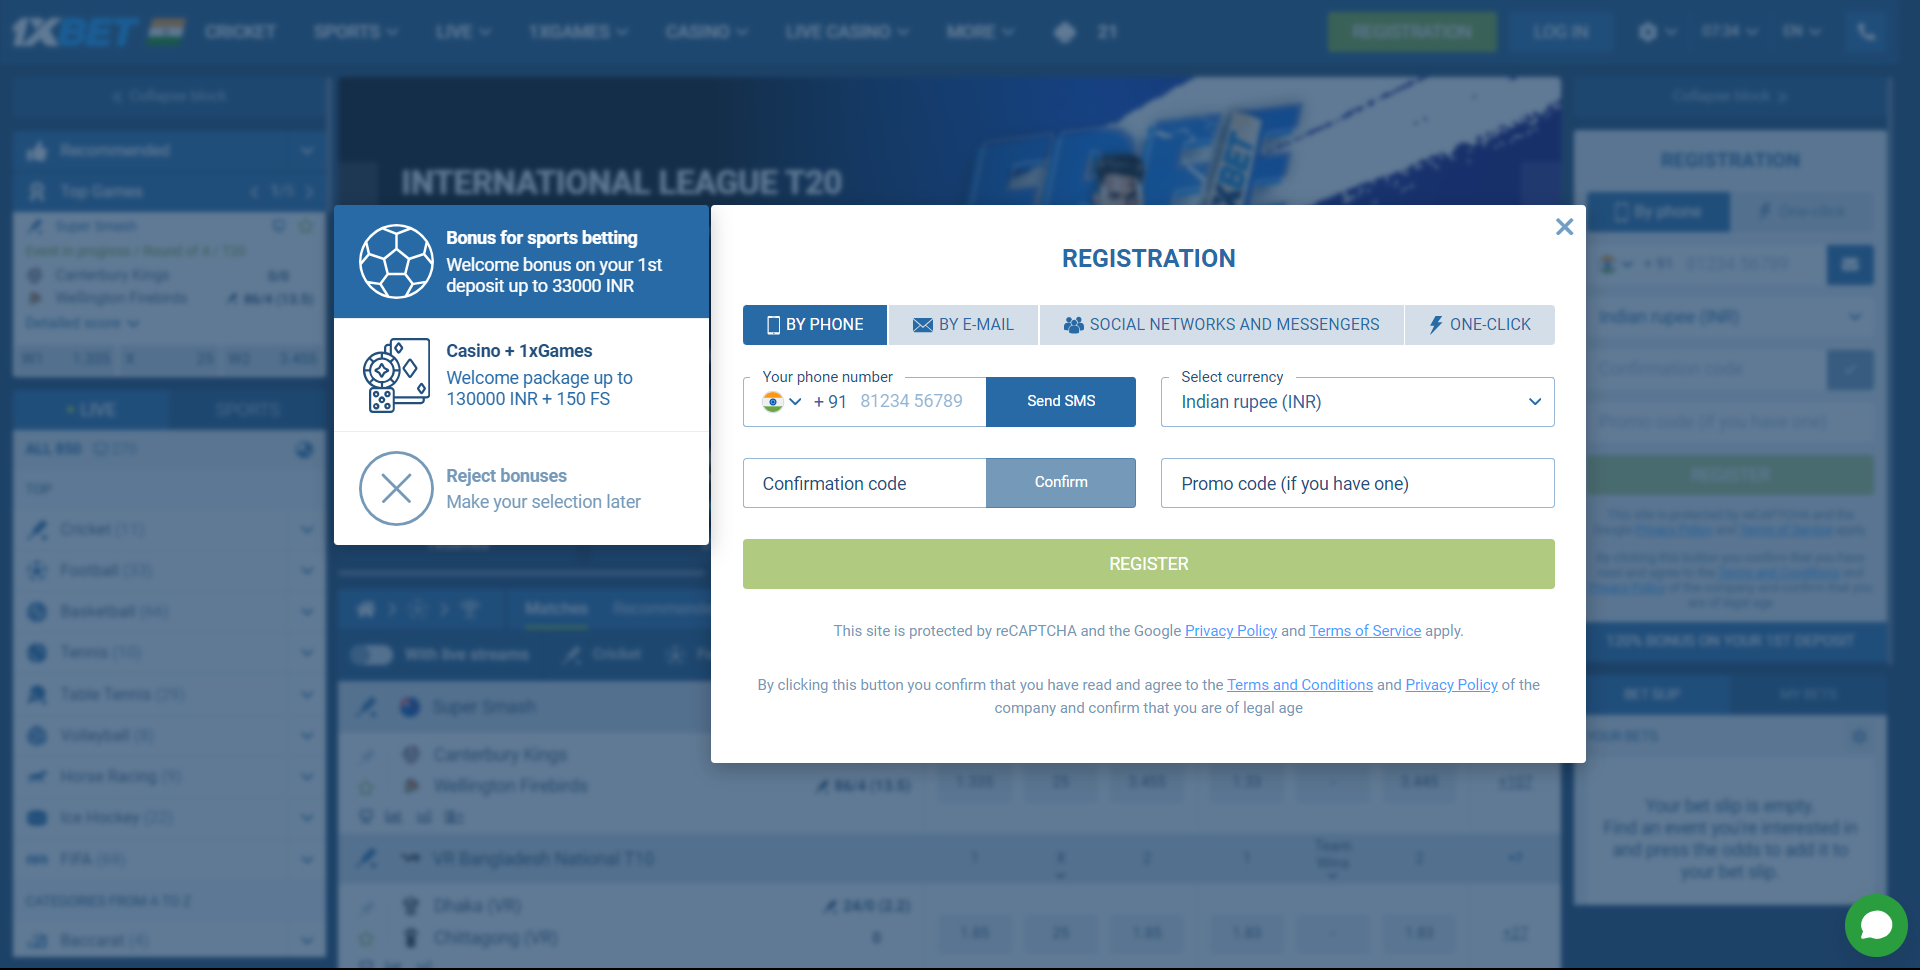 The 1xBet India Registration banner